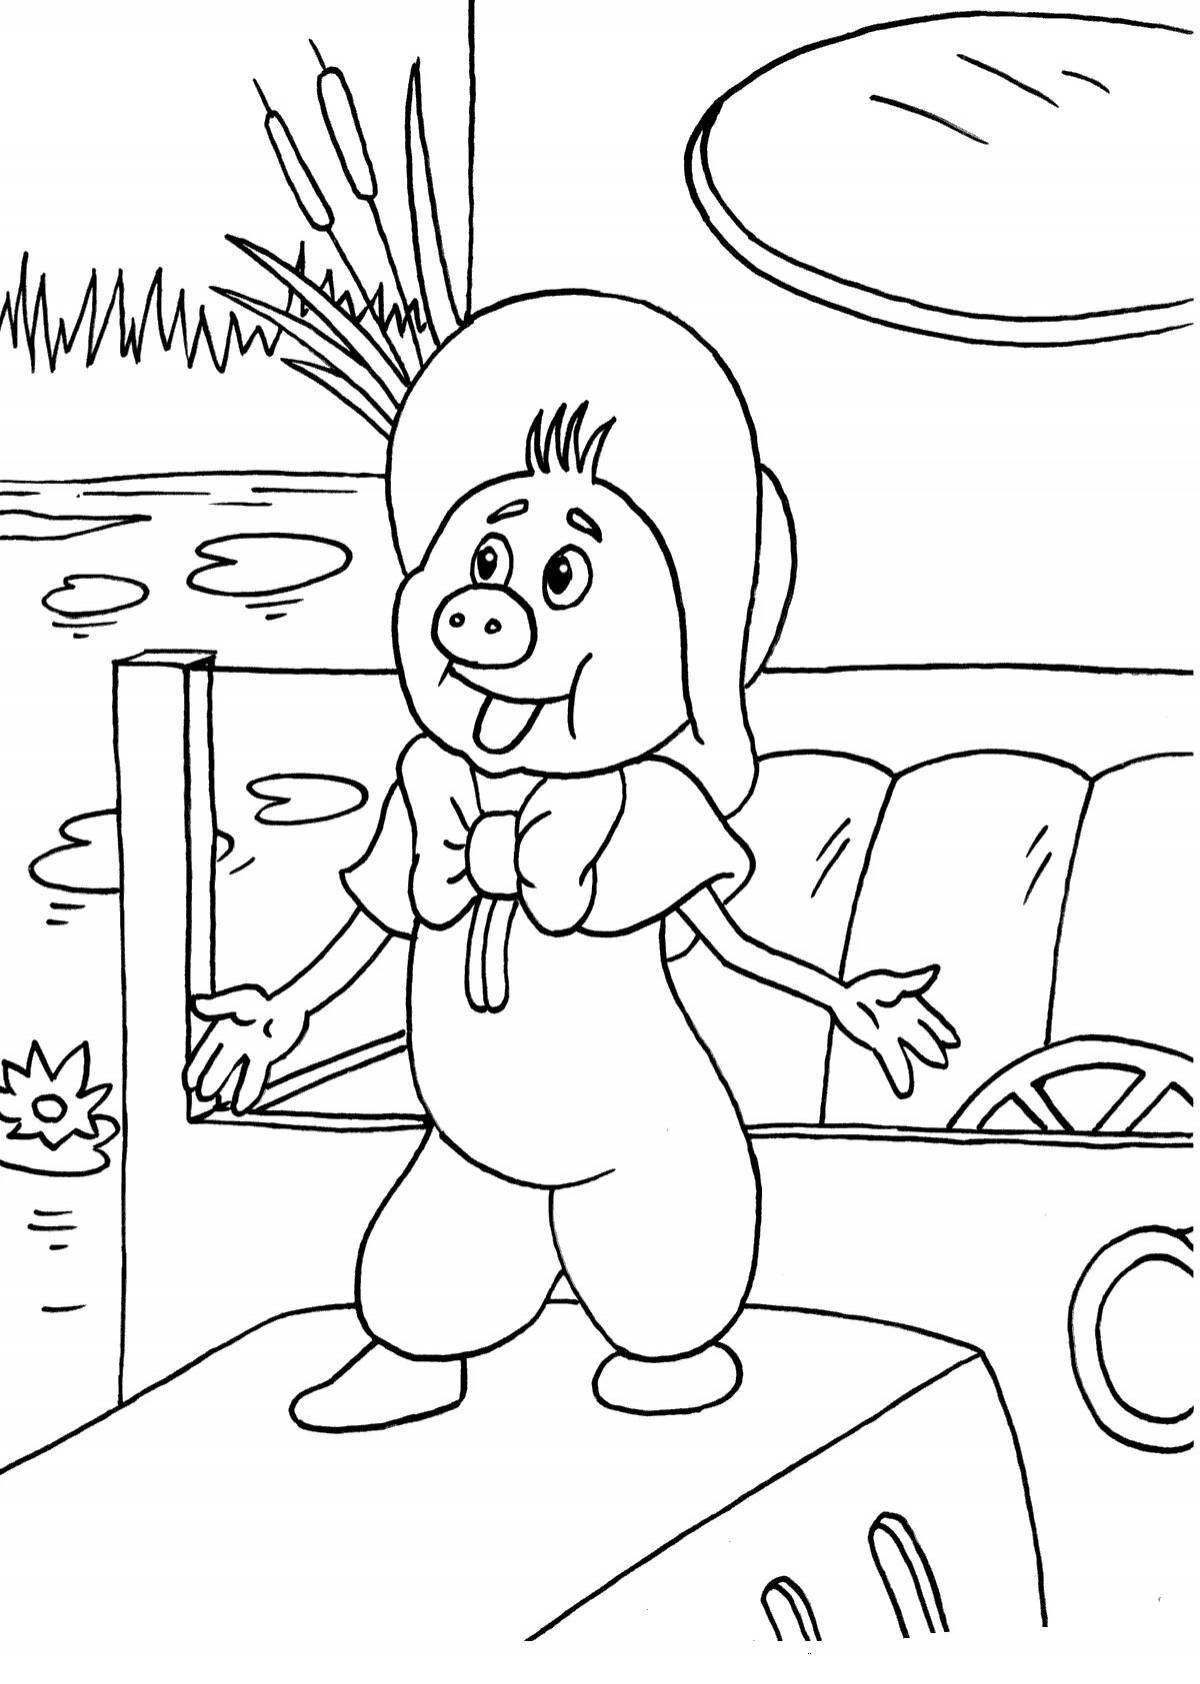 Dazzling funky uncle mokus coloring page